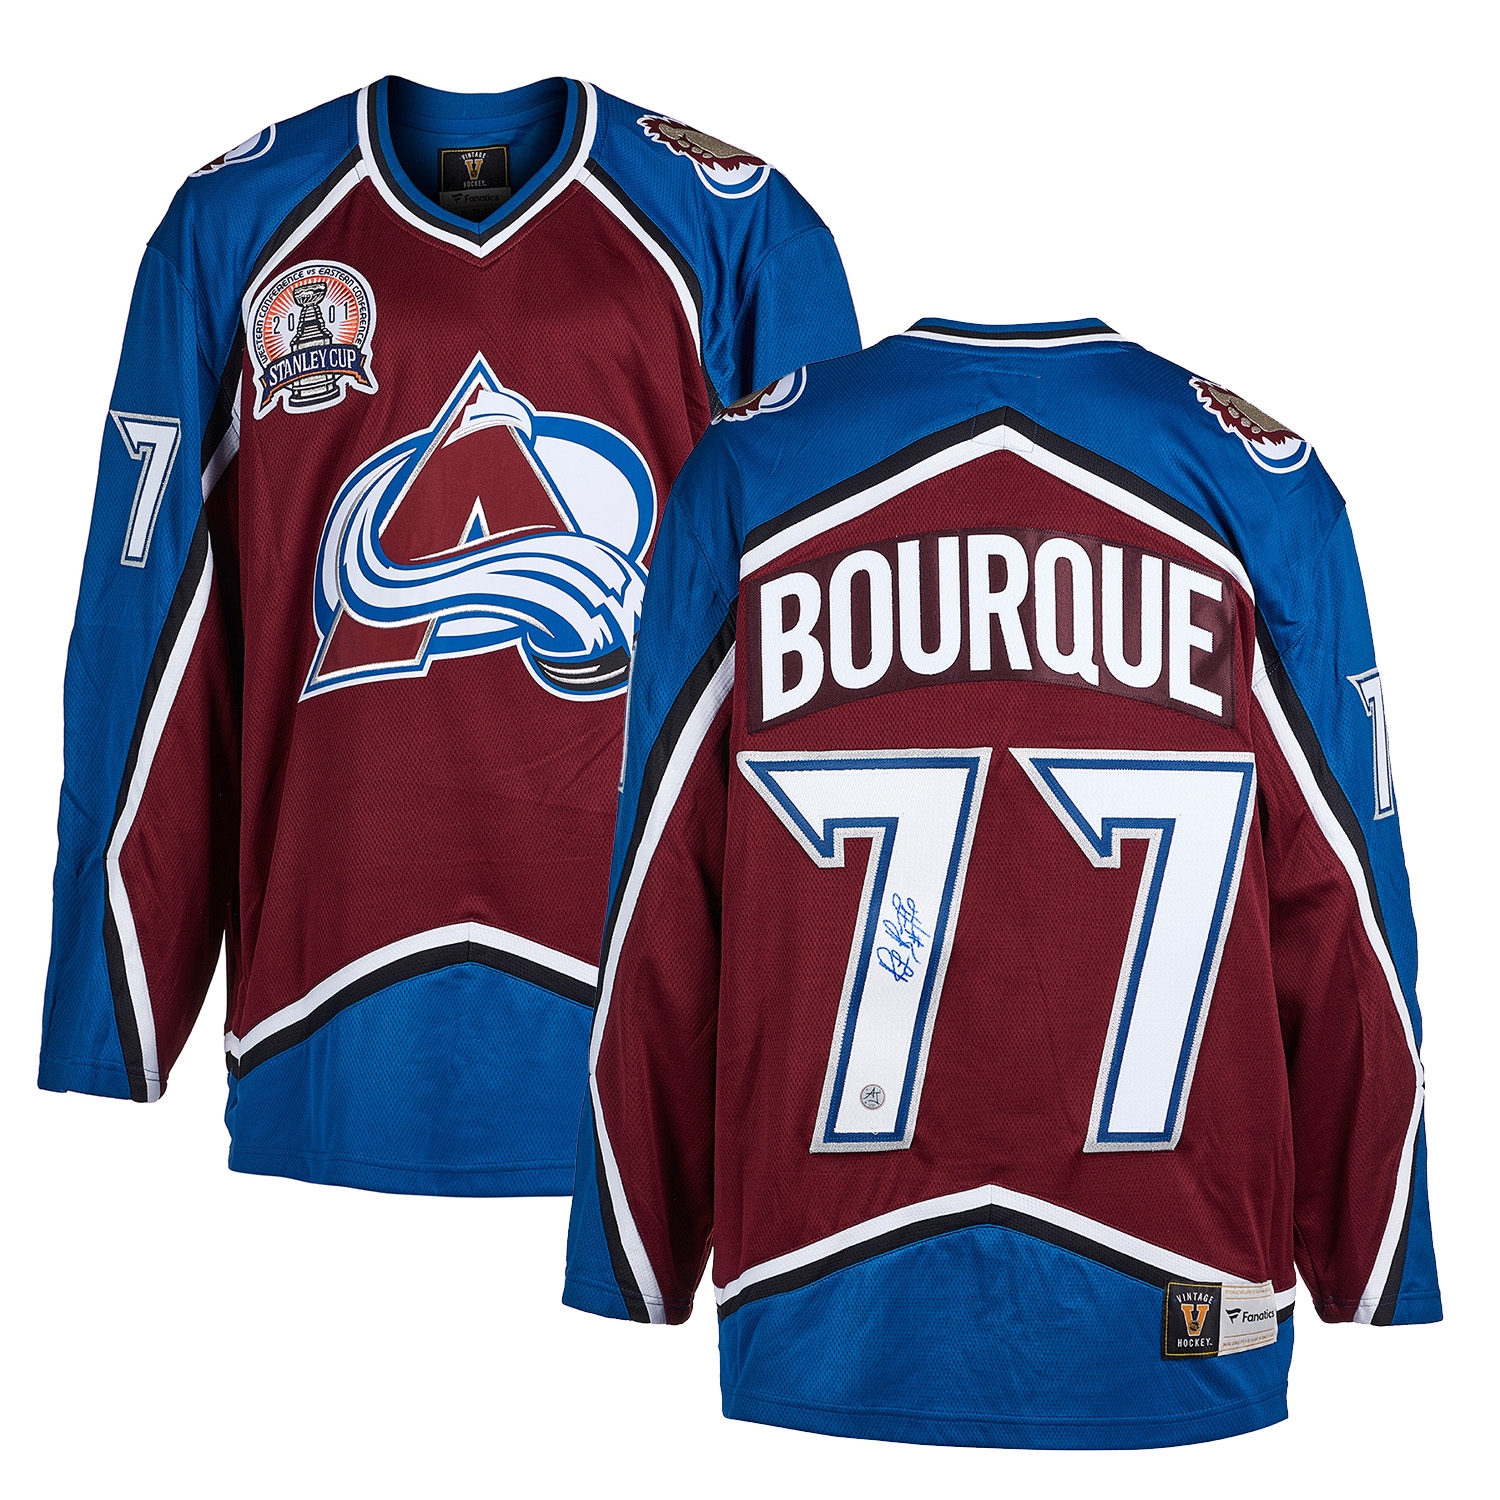 Ray Bourque Signed Colorado Avalanche 2001 Stanley Cup Fanatics Jersey